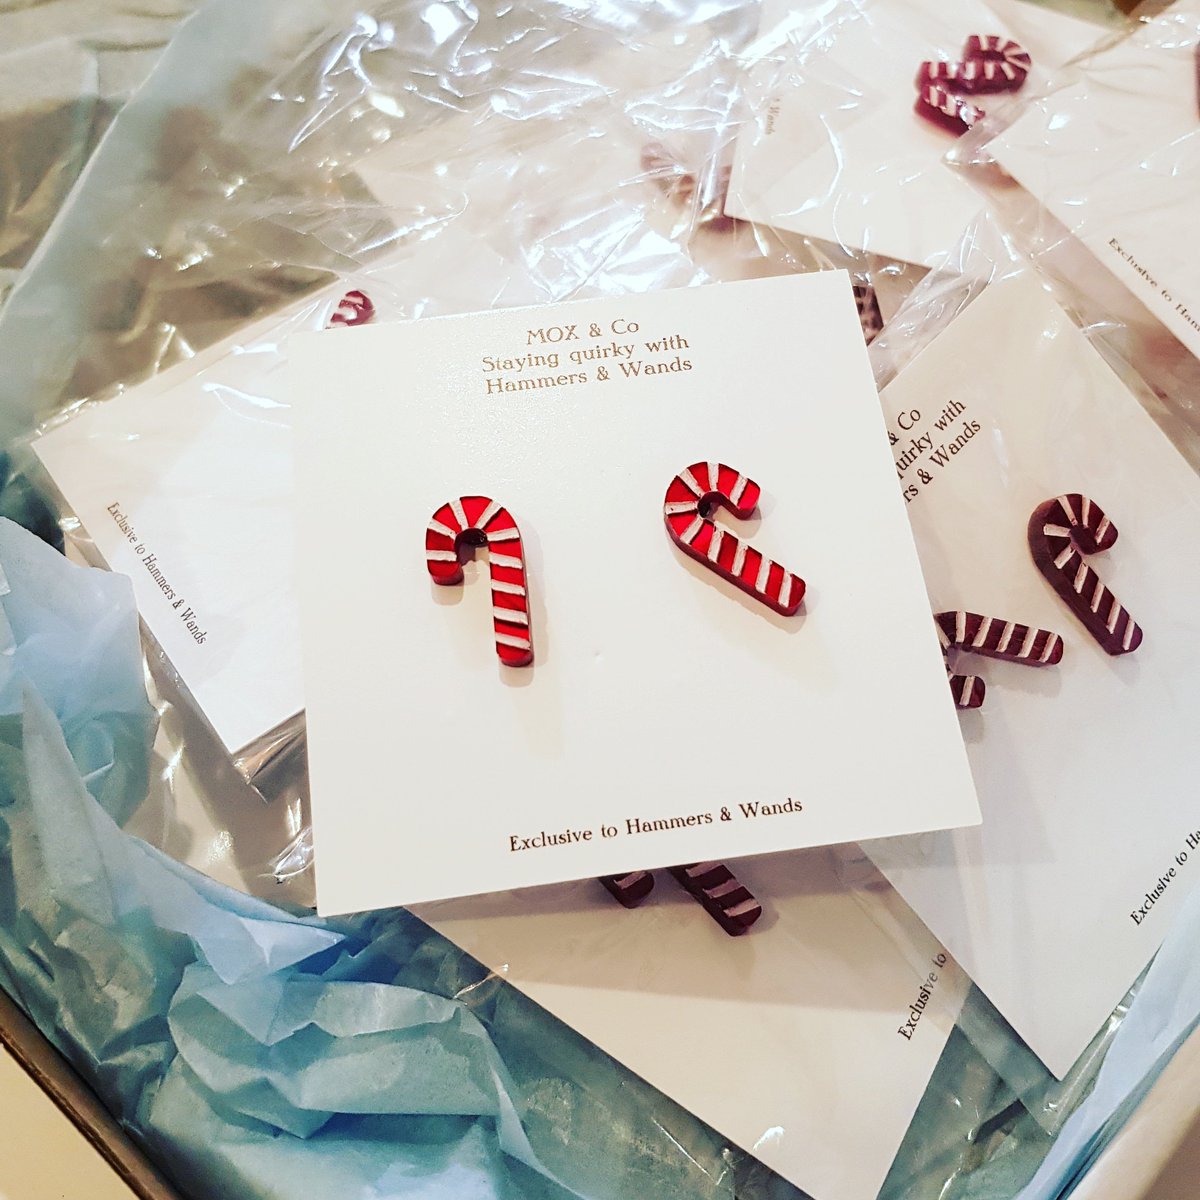 There's a New Stud in Town...
#hammersandwands #newstock #moxandco #christmastime #christmasgifts #christmasearrings #christmasstuds #christmasiscoming #candycane #allthingschristmas #handmade #australianmade #handmadewithlove #redmarble #sopretty #teachergifts #giftshop #kidshop